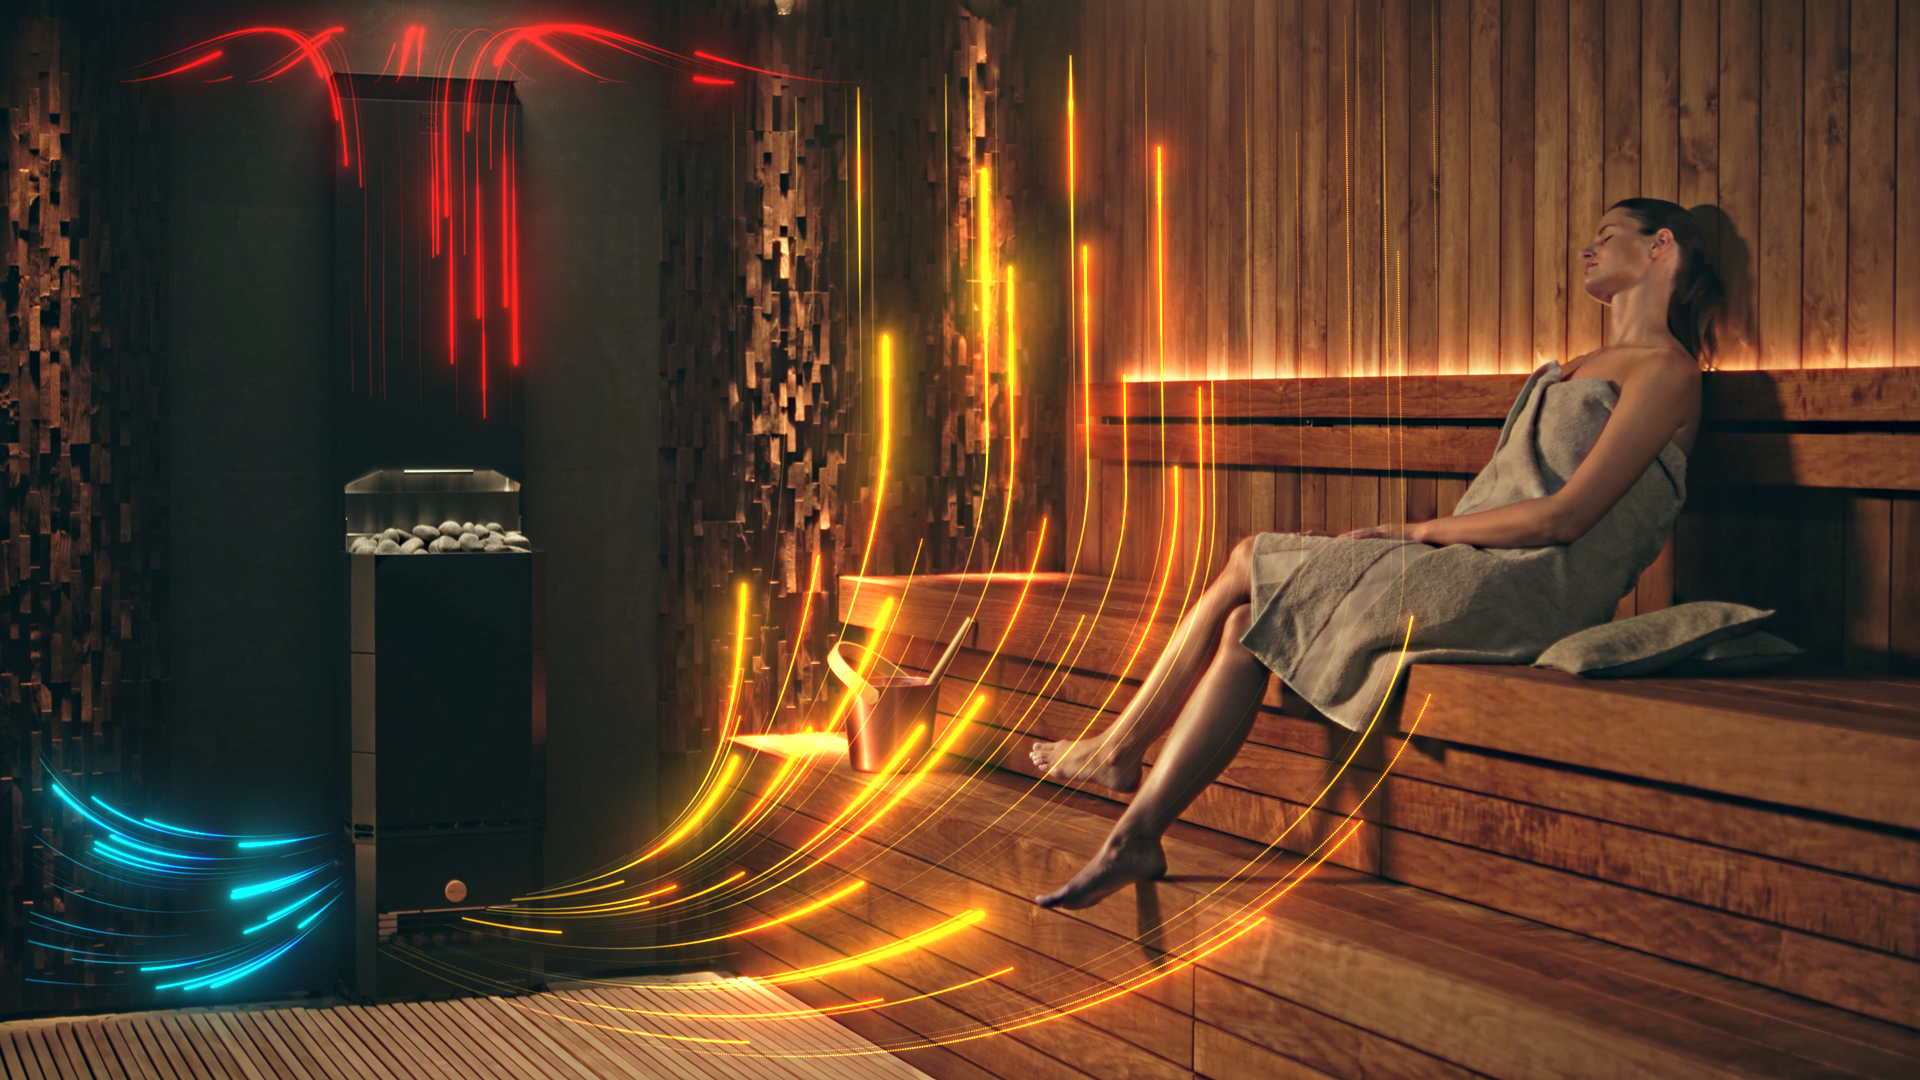 A girl in a sauna relaxes near the innovative Saunum heater, which mixes layers of hot and cold air for soft and easy breathing